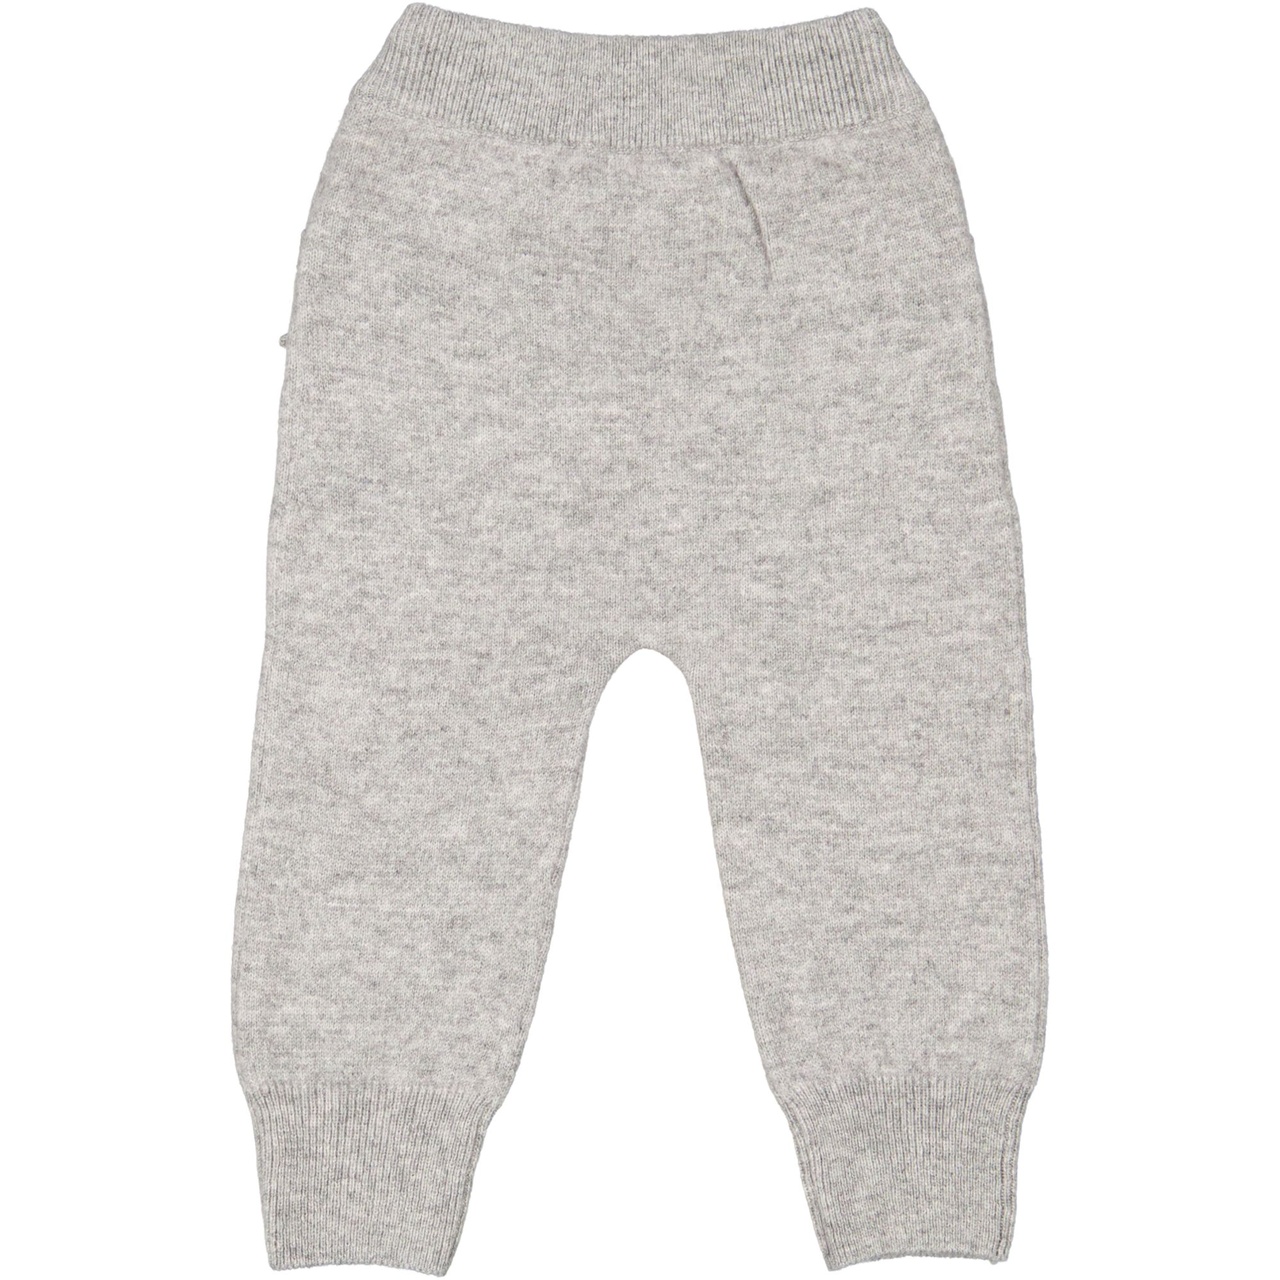 Cashmere trouser - Grey 62/68